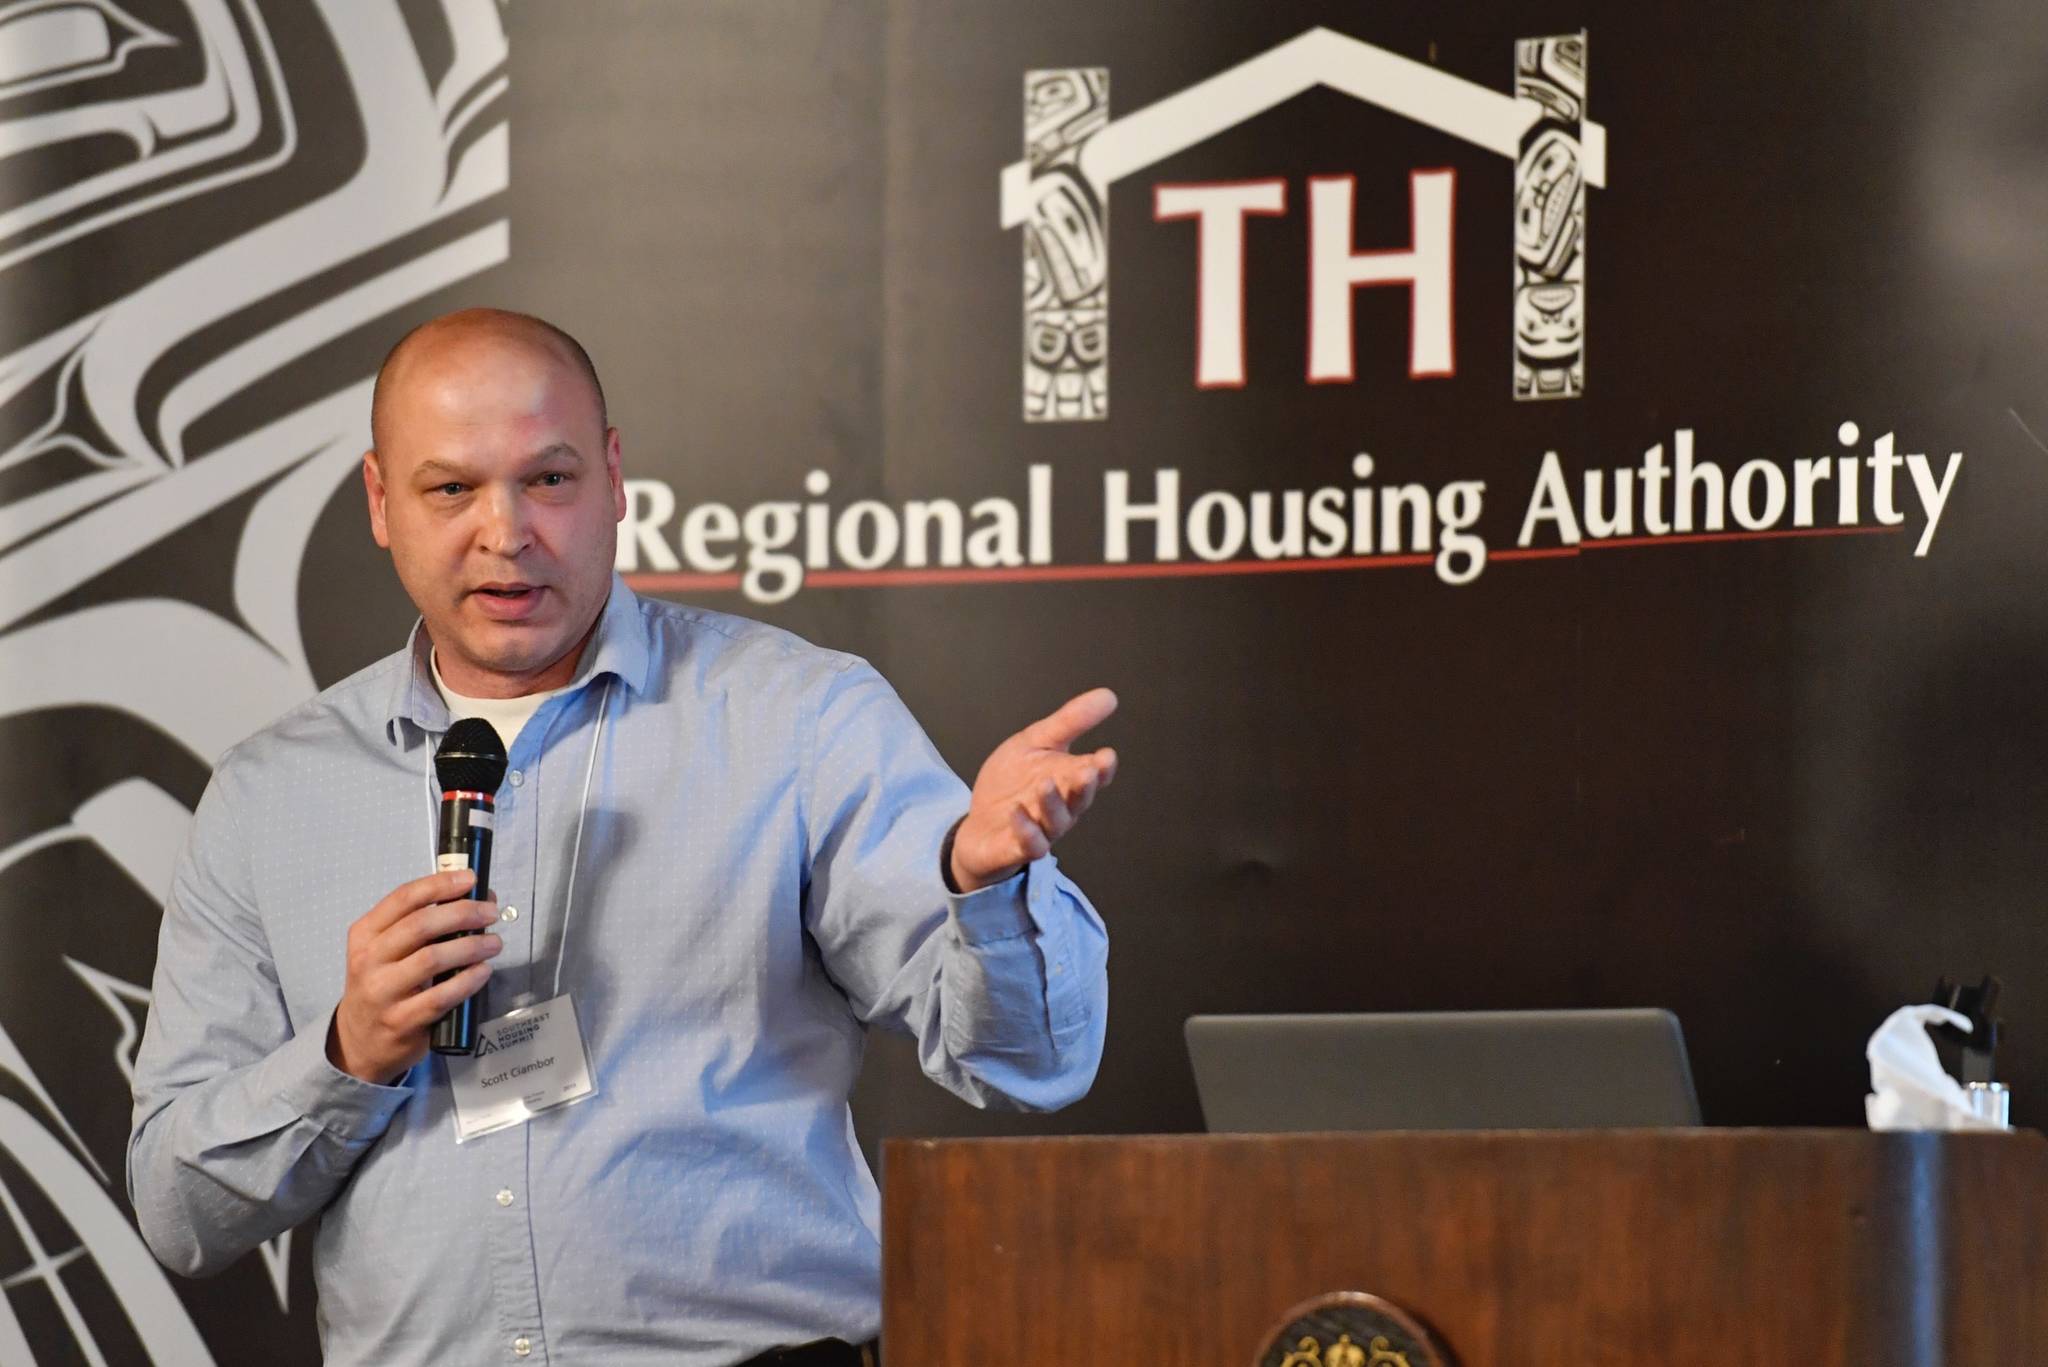 Scott Ciambor, chief housing gfficer for the City and Borough of Juneau and board chair for the Alaska Coalition on Housing and Homelessness, speaks at the Southeast Housing Summit at the Baranof Hotel on Wednesday, March 13, 2019. The summit is a two-day program organized by the Tlingit and Haida Regional Housing Authority. (Michael Penn | Juneau Empire)<strong></strong>